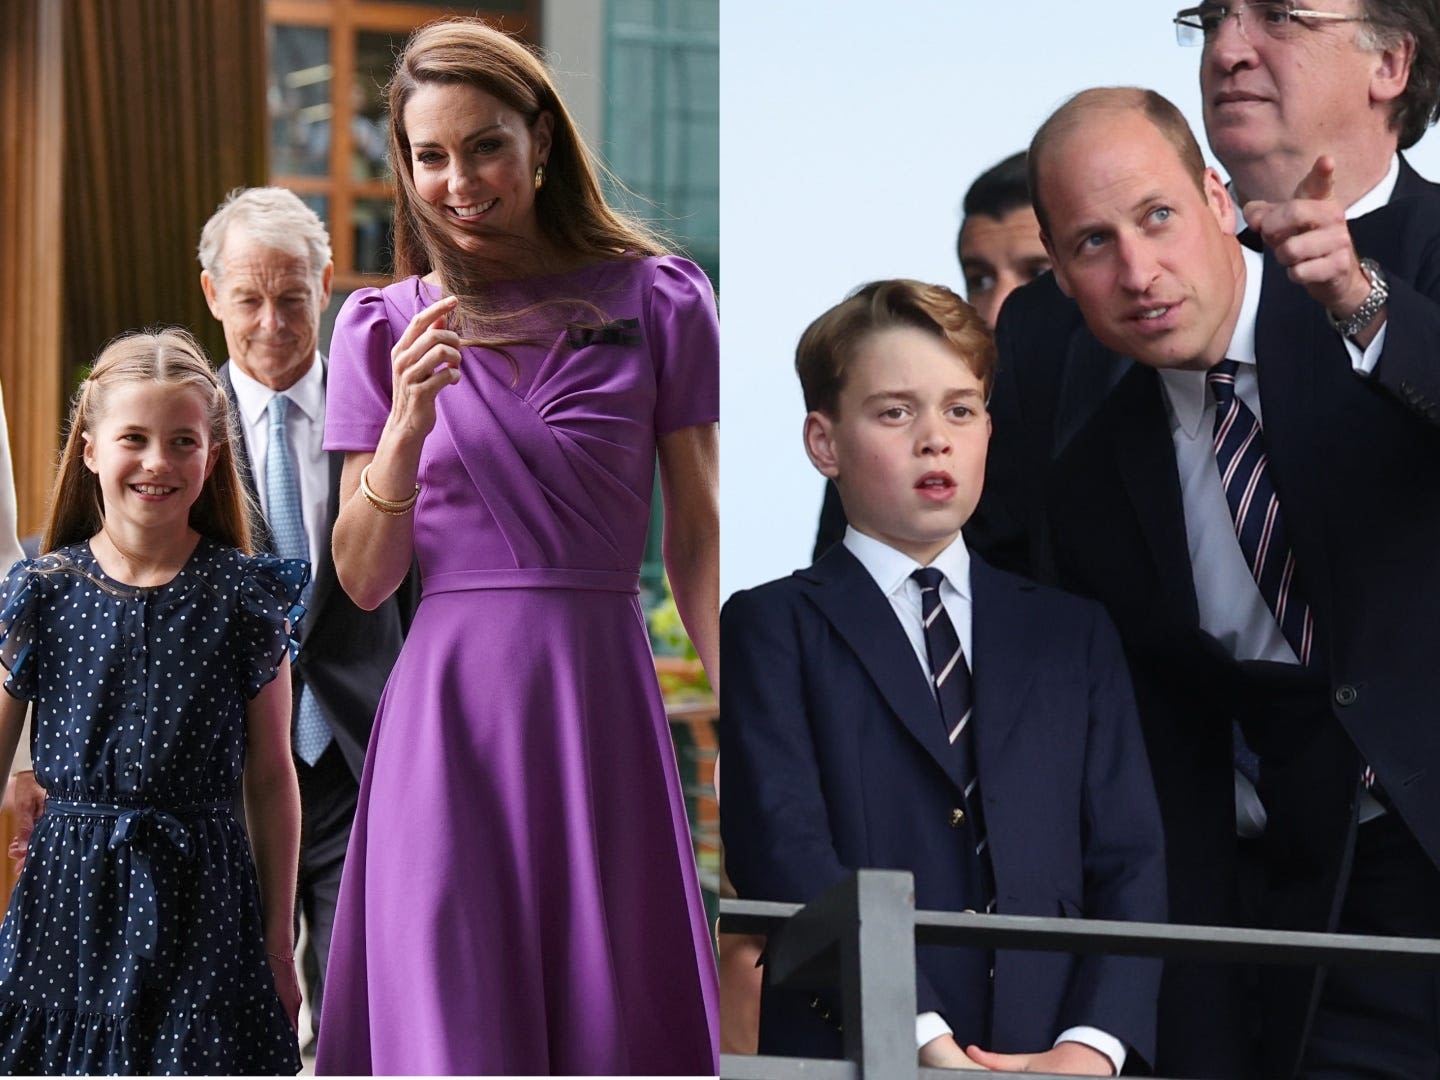 Prince William and Kate Middleton are following through on their word to put their kids first